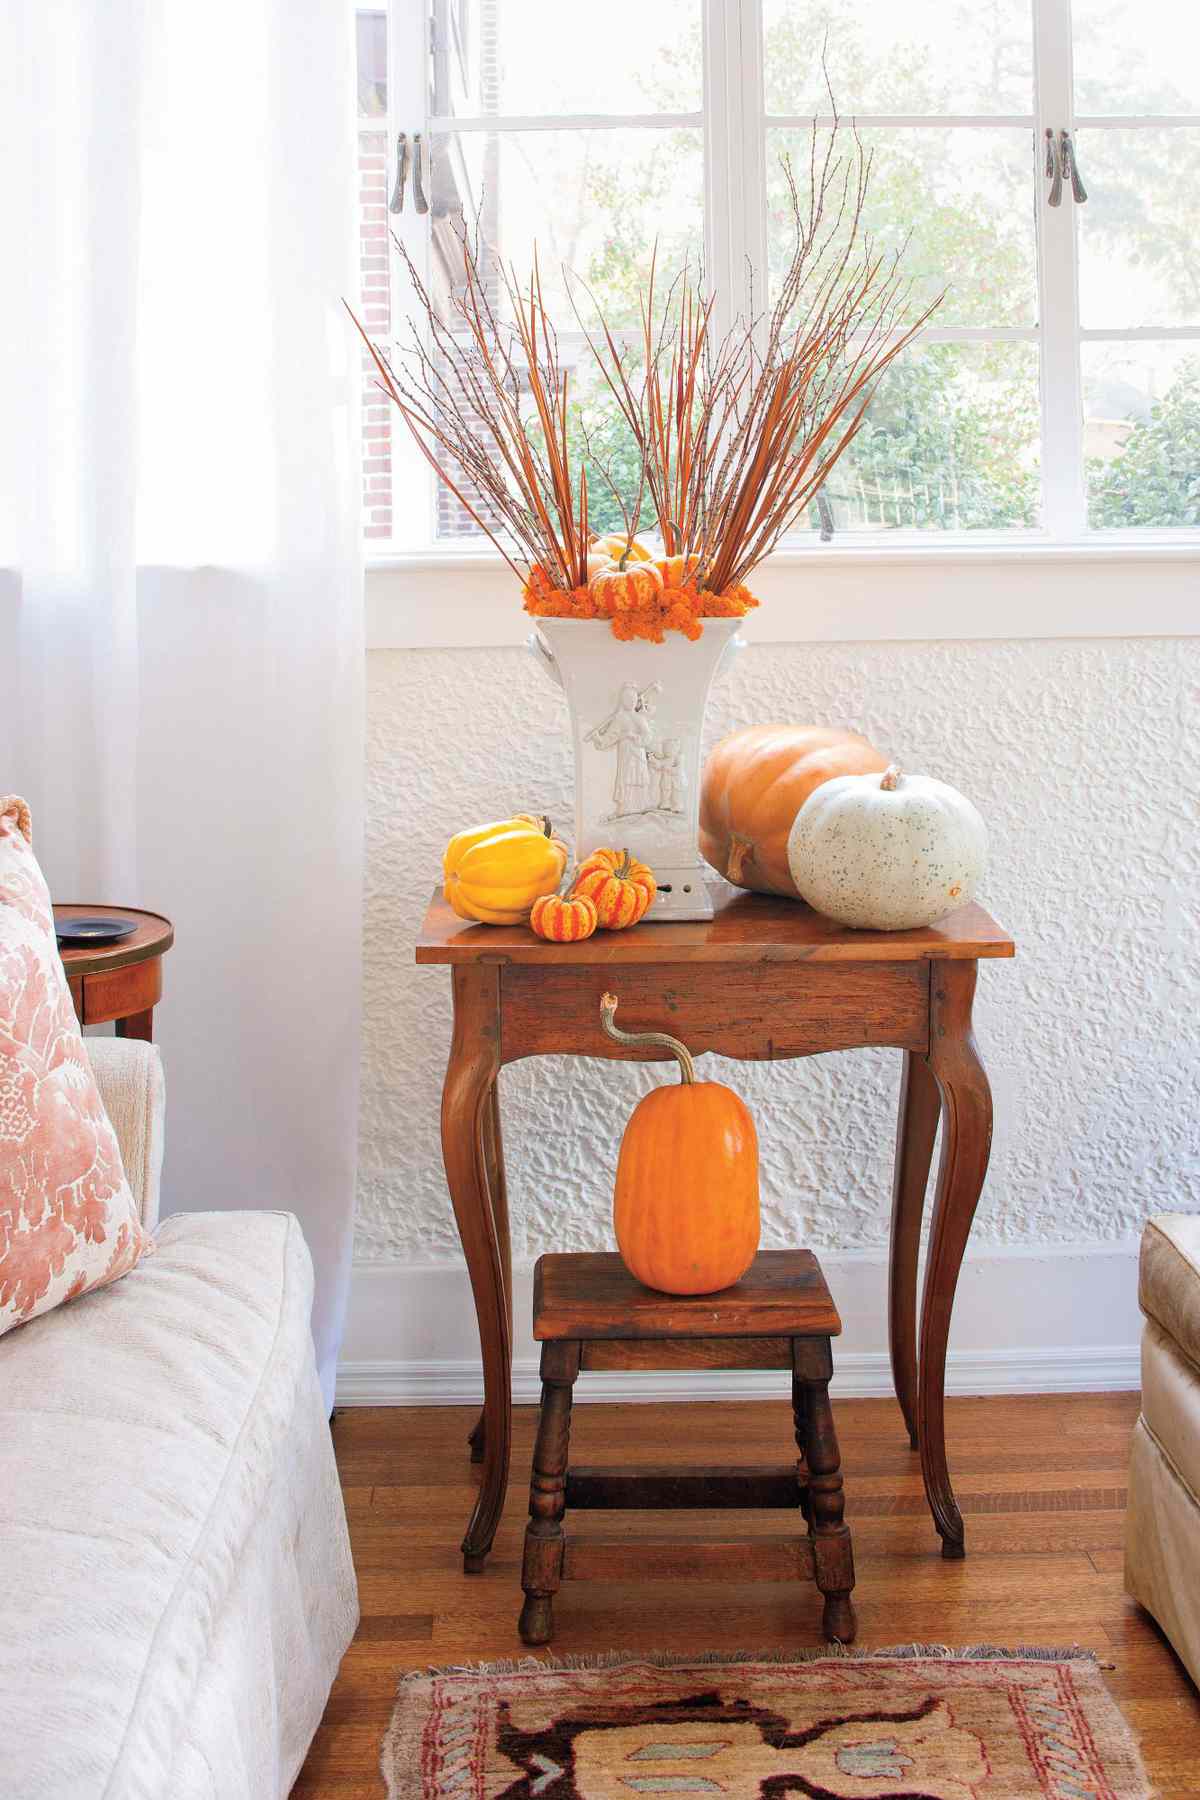 Add Height to Your Pumpkin Display